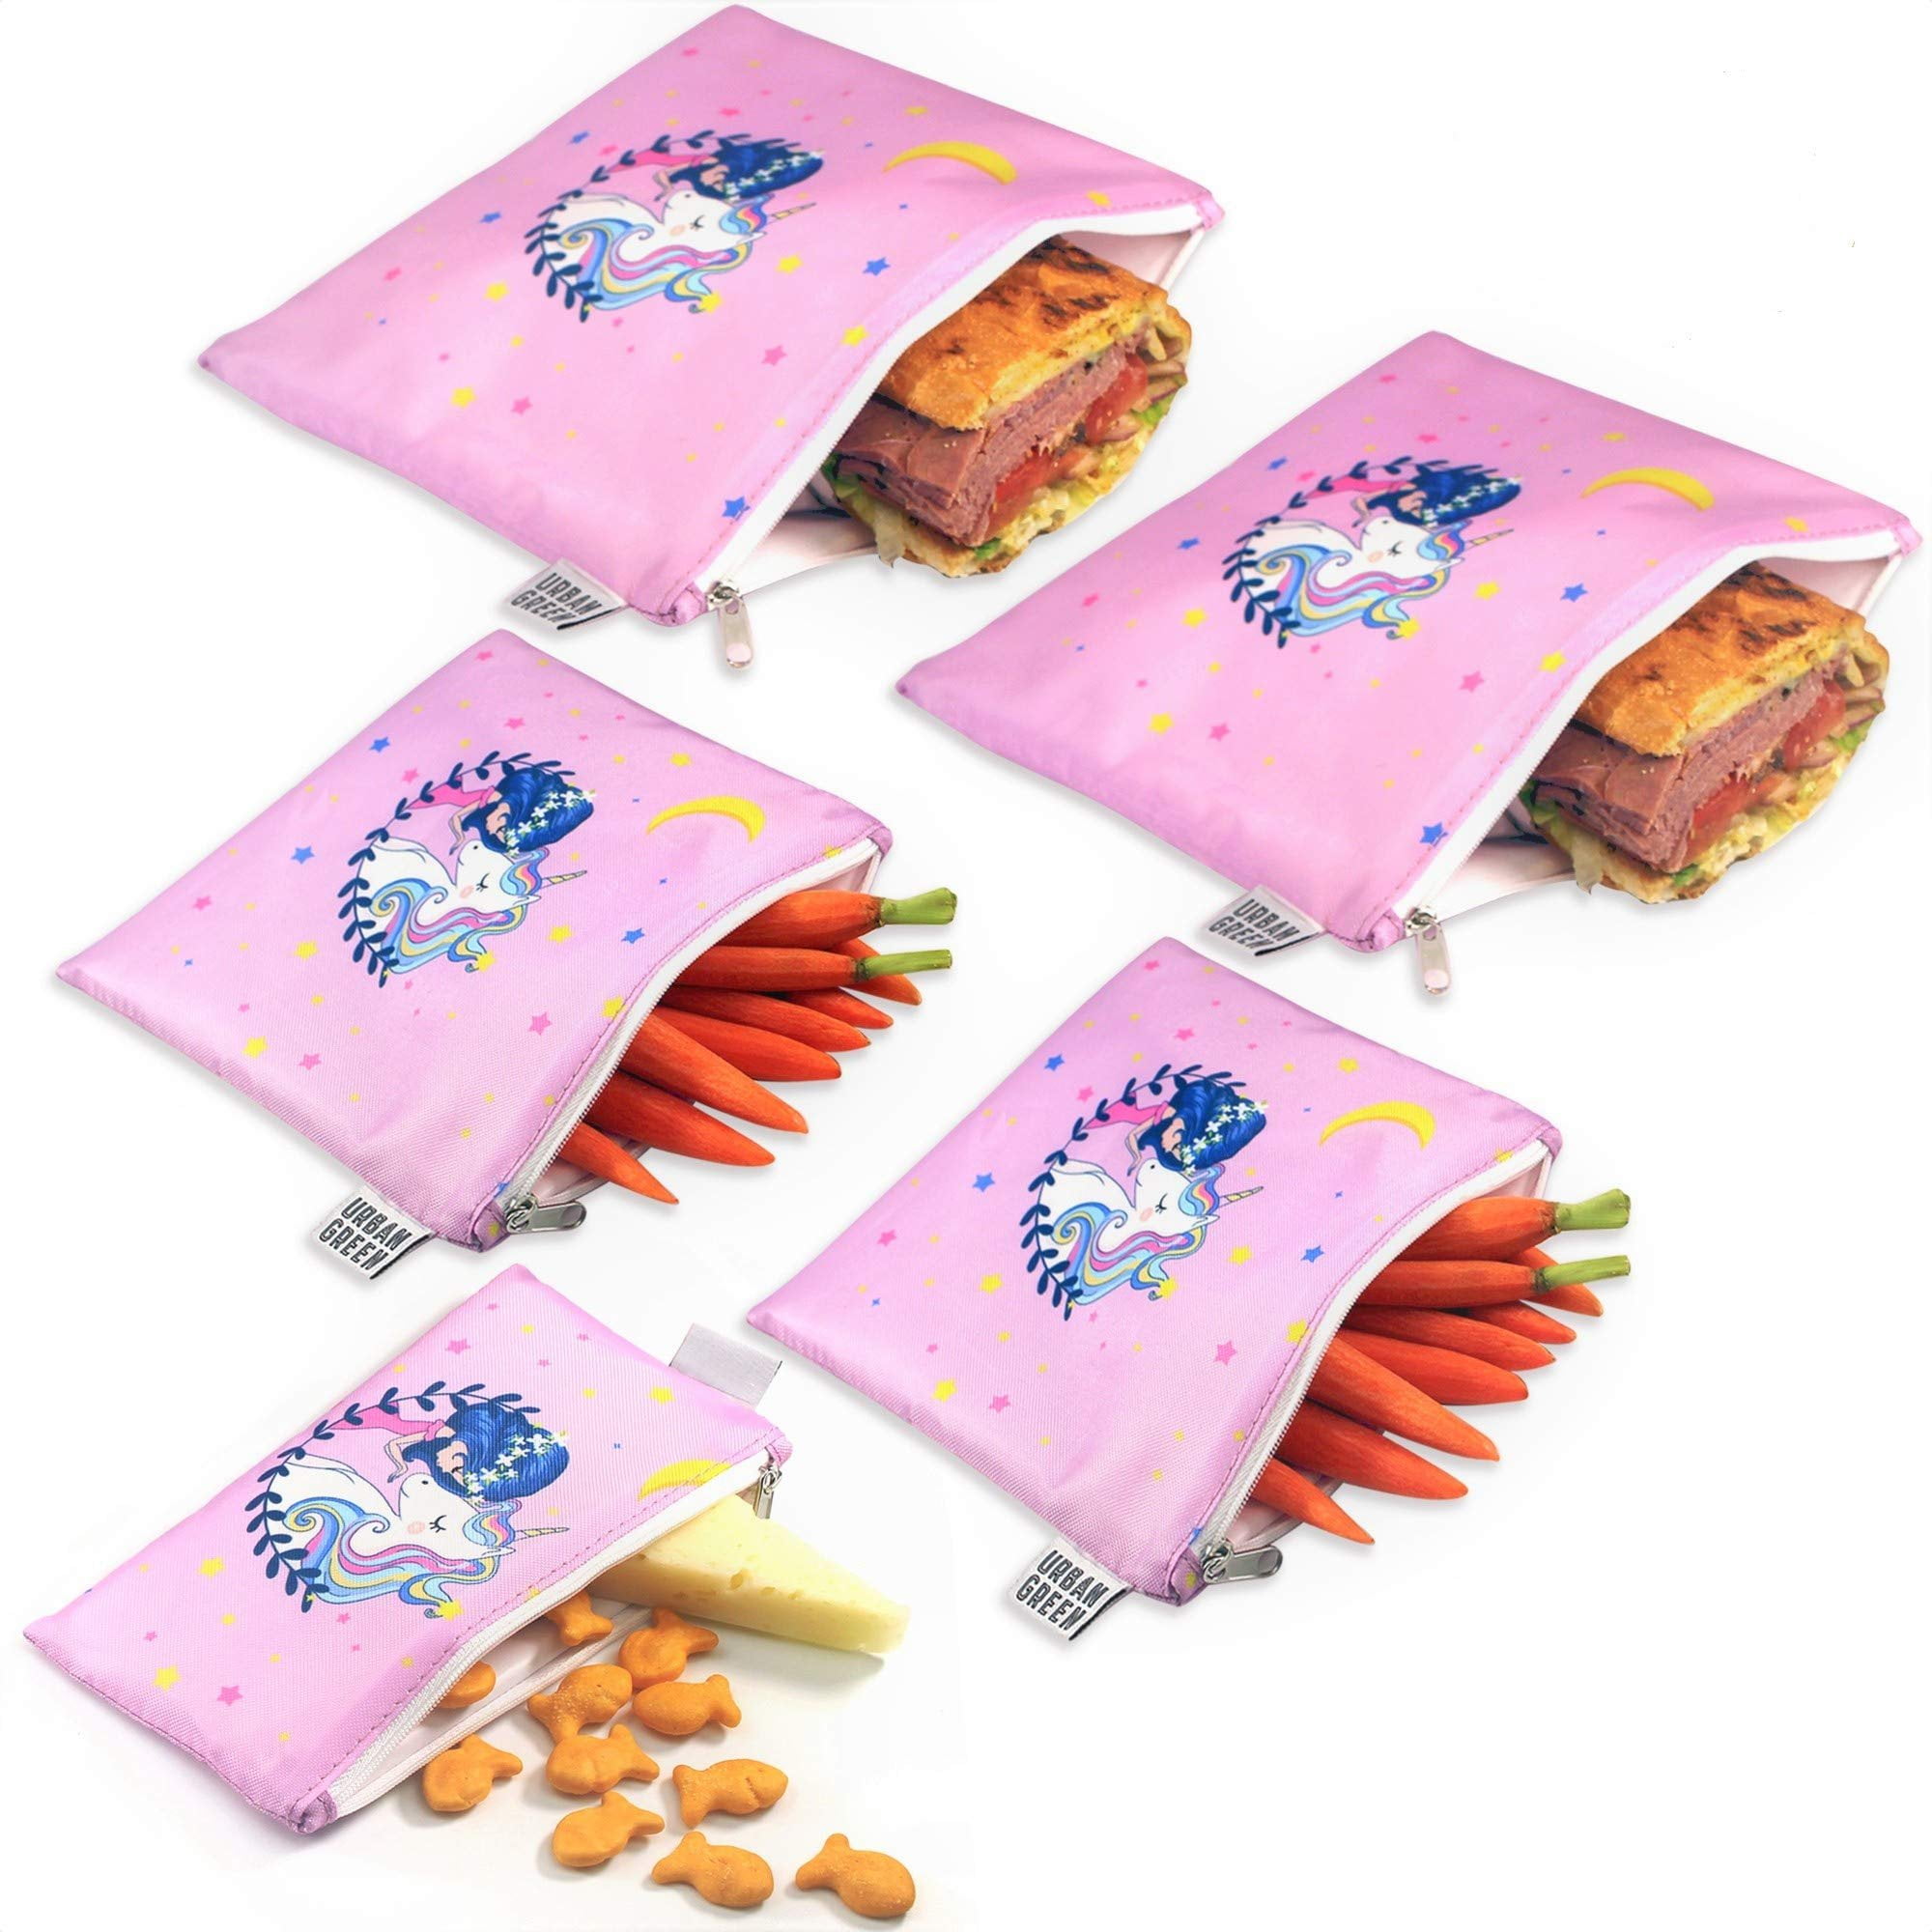 6 Pcs Reusable Snack Bags for Kids School Gift Food Safety Cute Washable  Snack Bags for Kids Lunch with Zipper Kids Portable Sandwich Bag Food  Storage